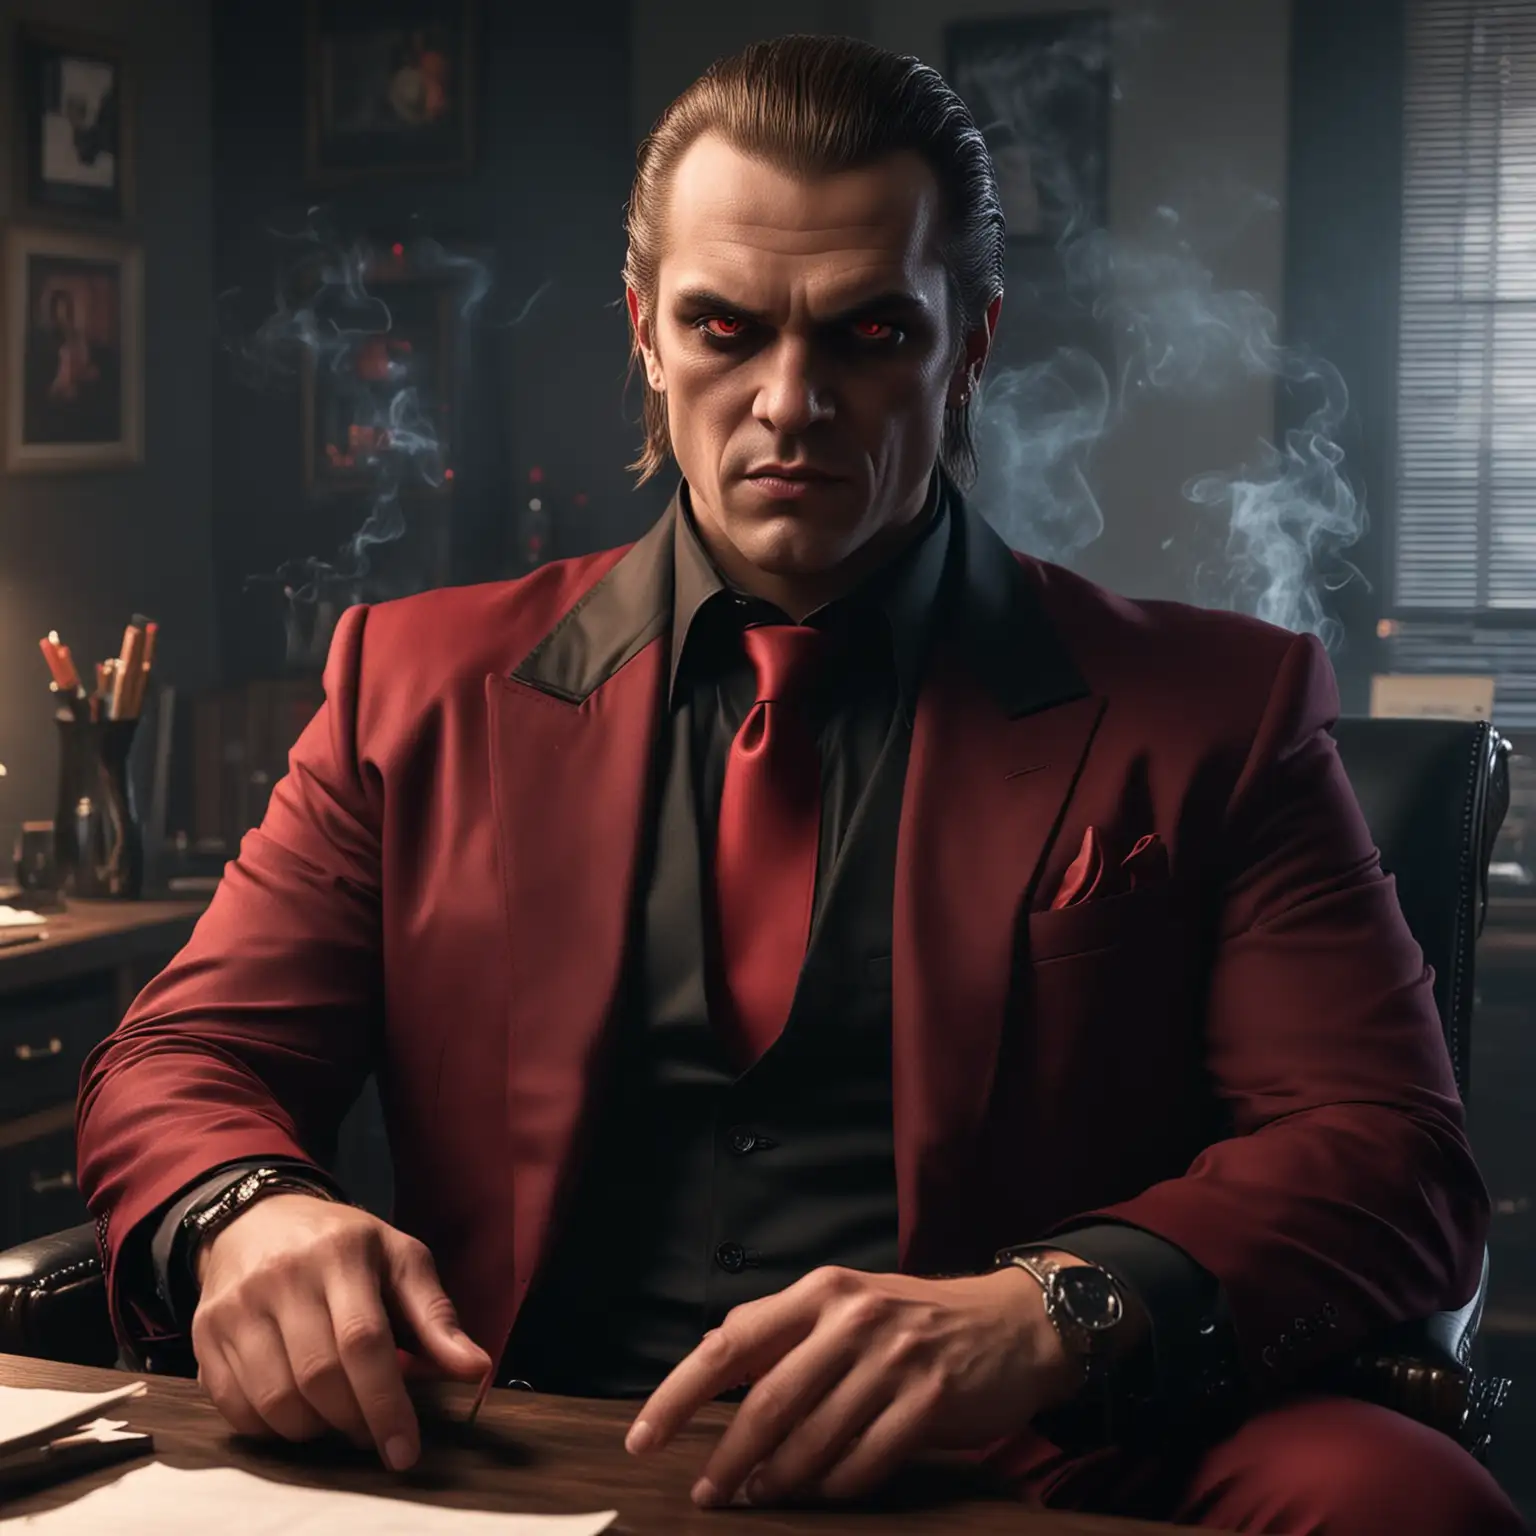 A male Gangrel vampire, mafia boss, red glowing eyes, wearing a deep red suit, black dress shirt, sitting in a dark room with a desk and an office chair, smoking a cigar, overweight, ponytail, smirk on his face, realistic